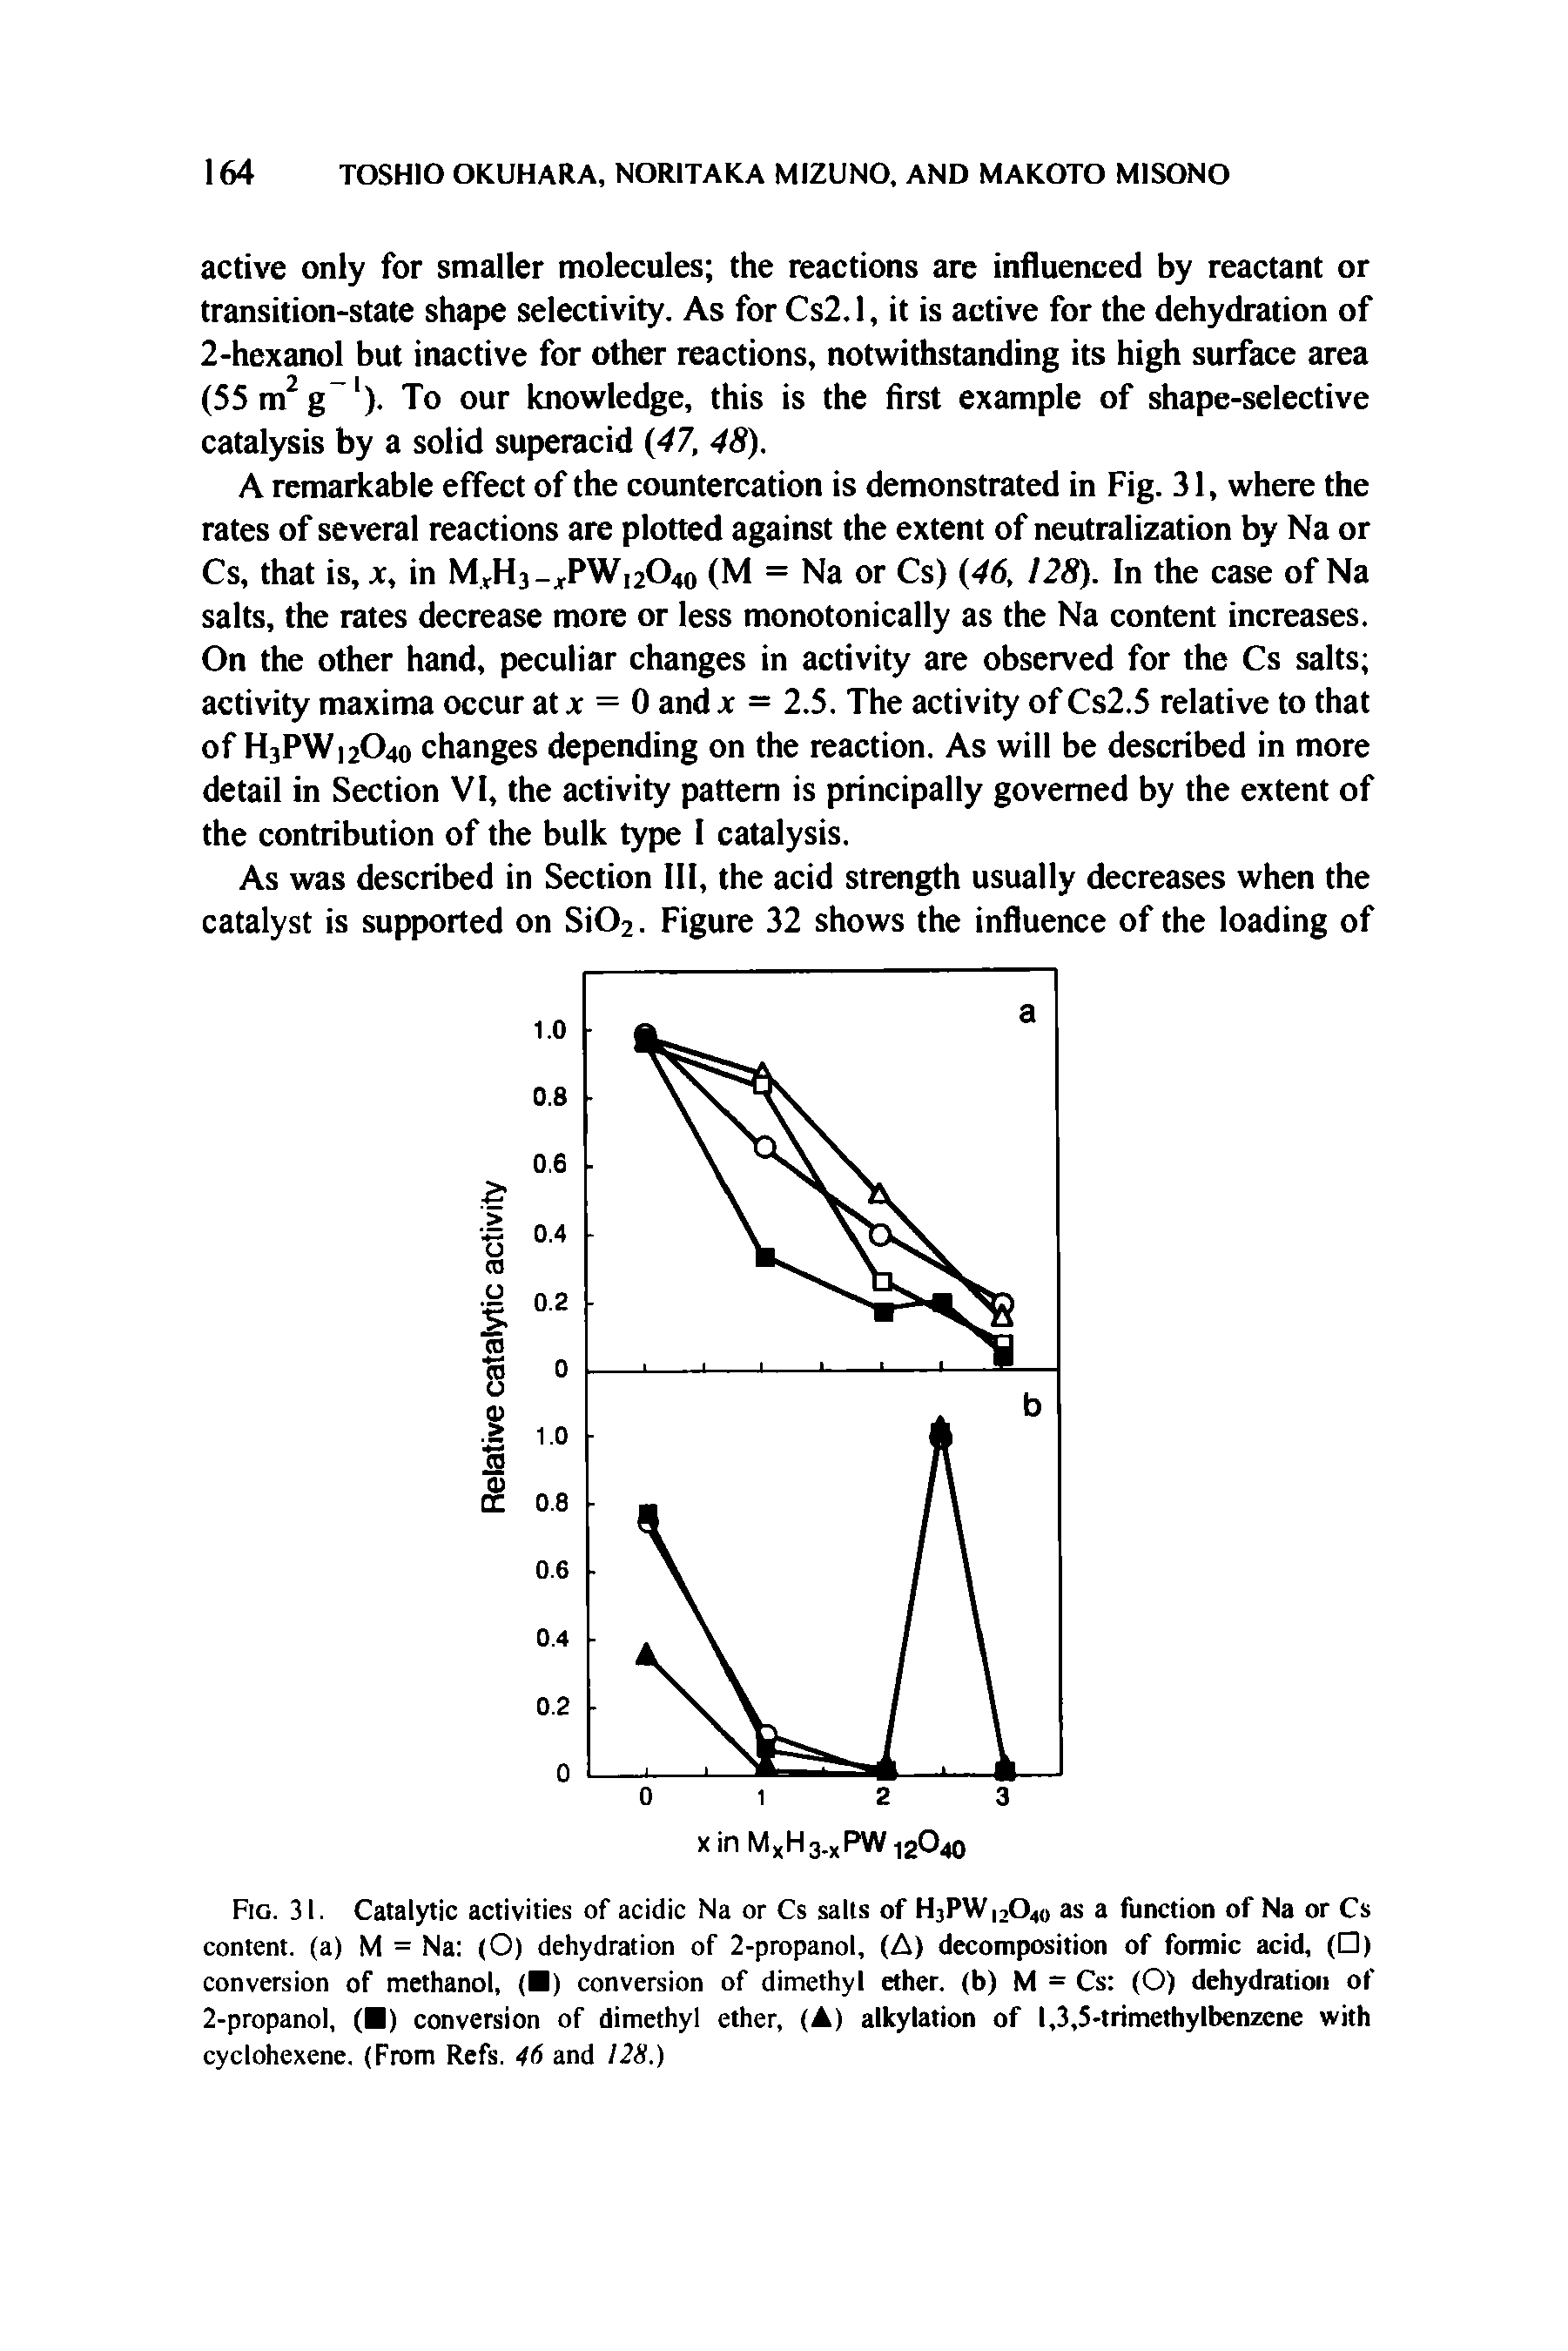 Fig. 31. Catalytic activities of acidic Na or Cs salts of HjPW 204o as a function of Na or Cs content, (a) M = Na (O) dehydration of 2-propanol, (A) decomposition of formic acid, ( ) conversion of methanol, ( ) conversion of dimethyl ether, (b) M = Cs (O) dehydration of 2-propanol, ( ) conversion of dimethyl ether, (A) alkylation of 1,3,5-trimethylbenzene with cyclohexene. (From Refs. 46 and 128.)...